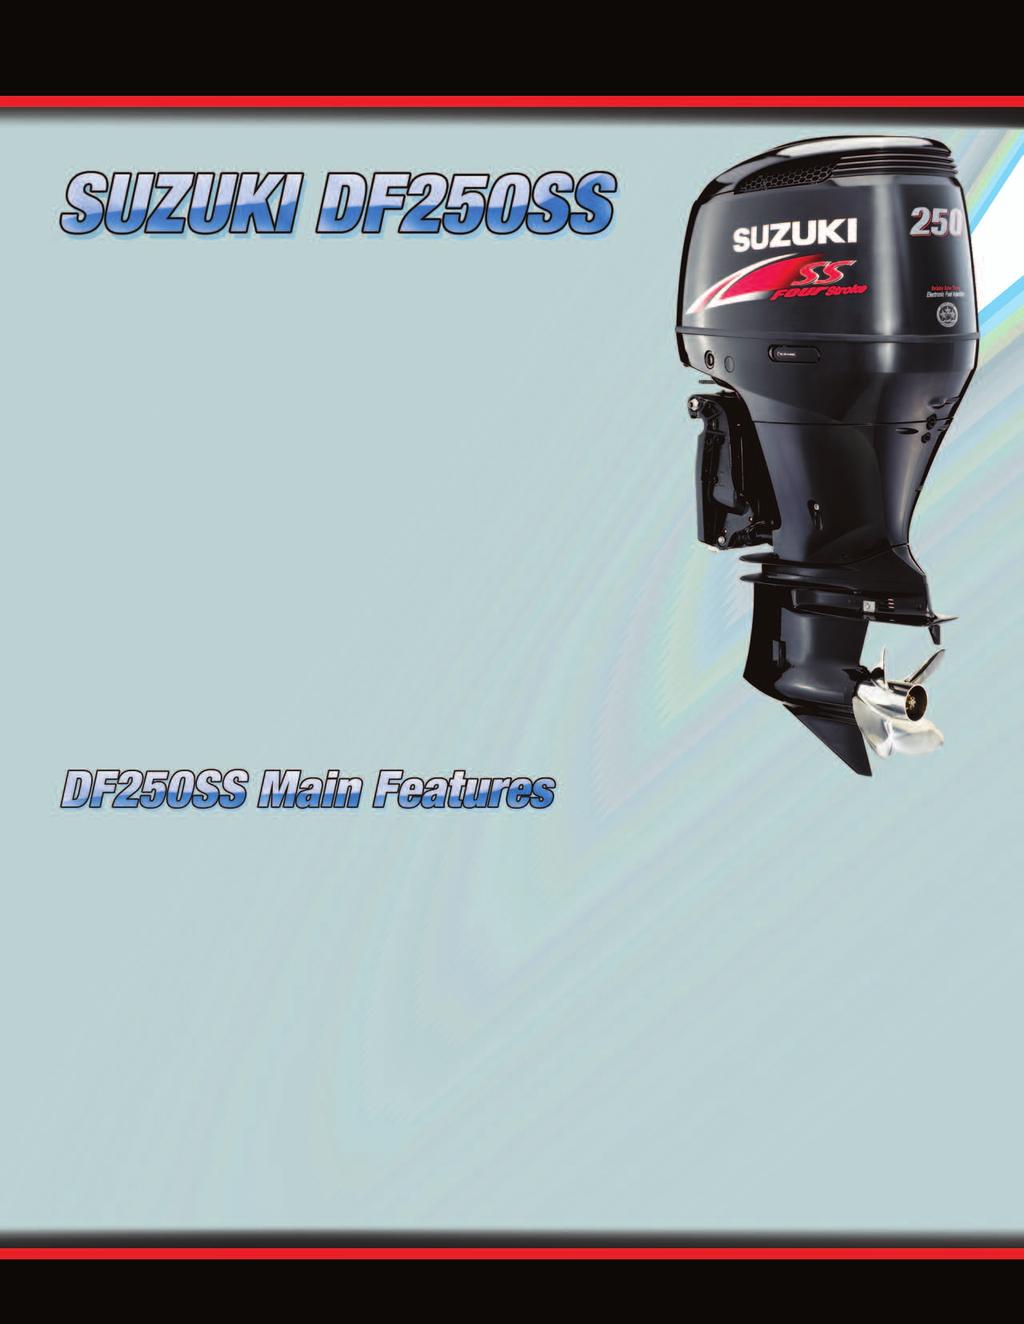 The DF250S represents a new kind of Suzuki outboard a Sports 4-Stroke designed for the sportsman who is serious about outboard performance. Based on a 4.